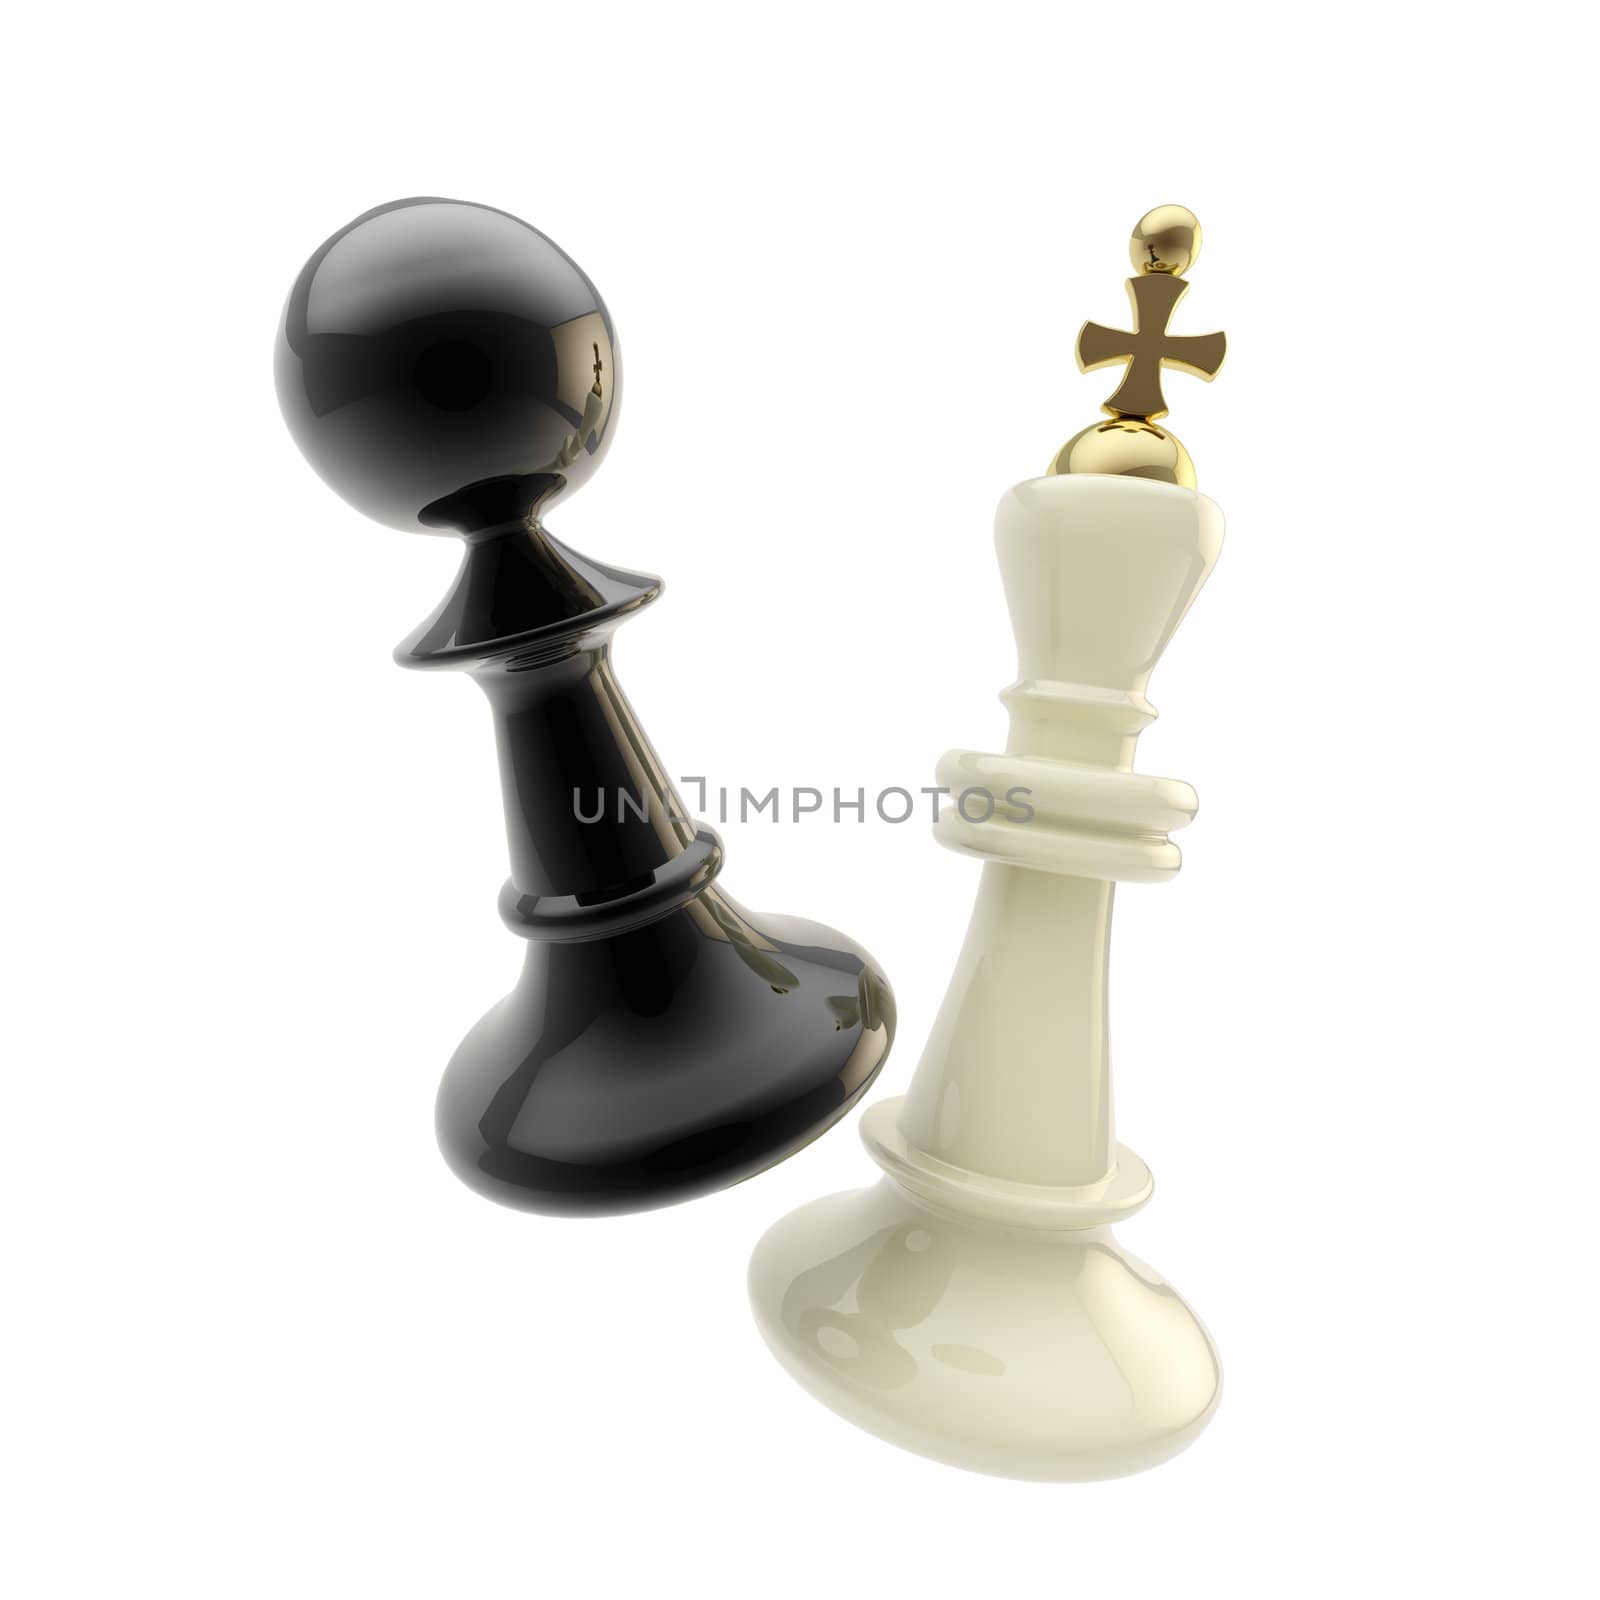 Contest and competition: pawn and king figures by nbvf